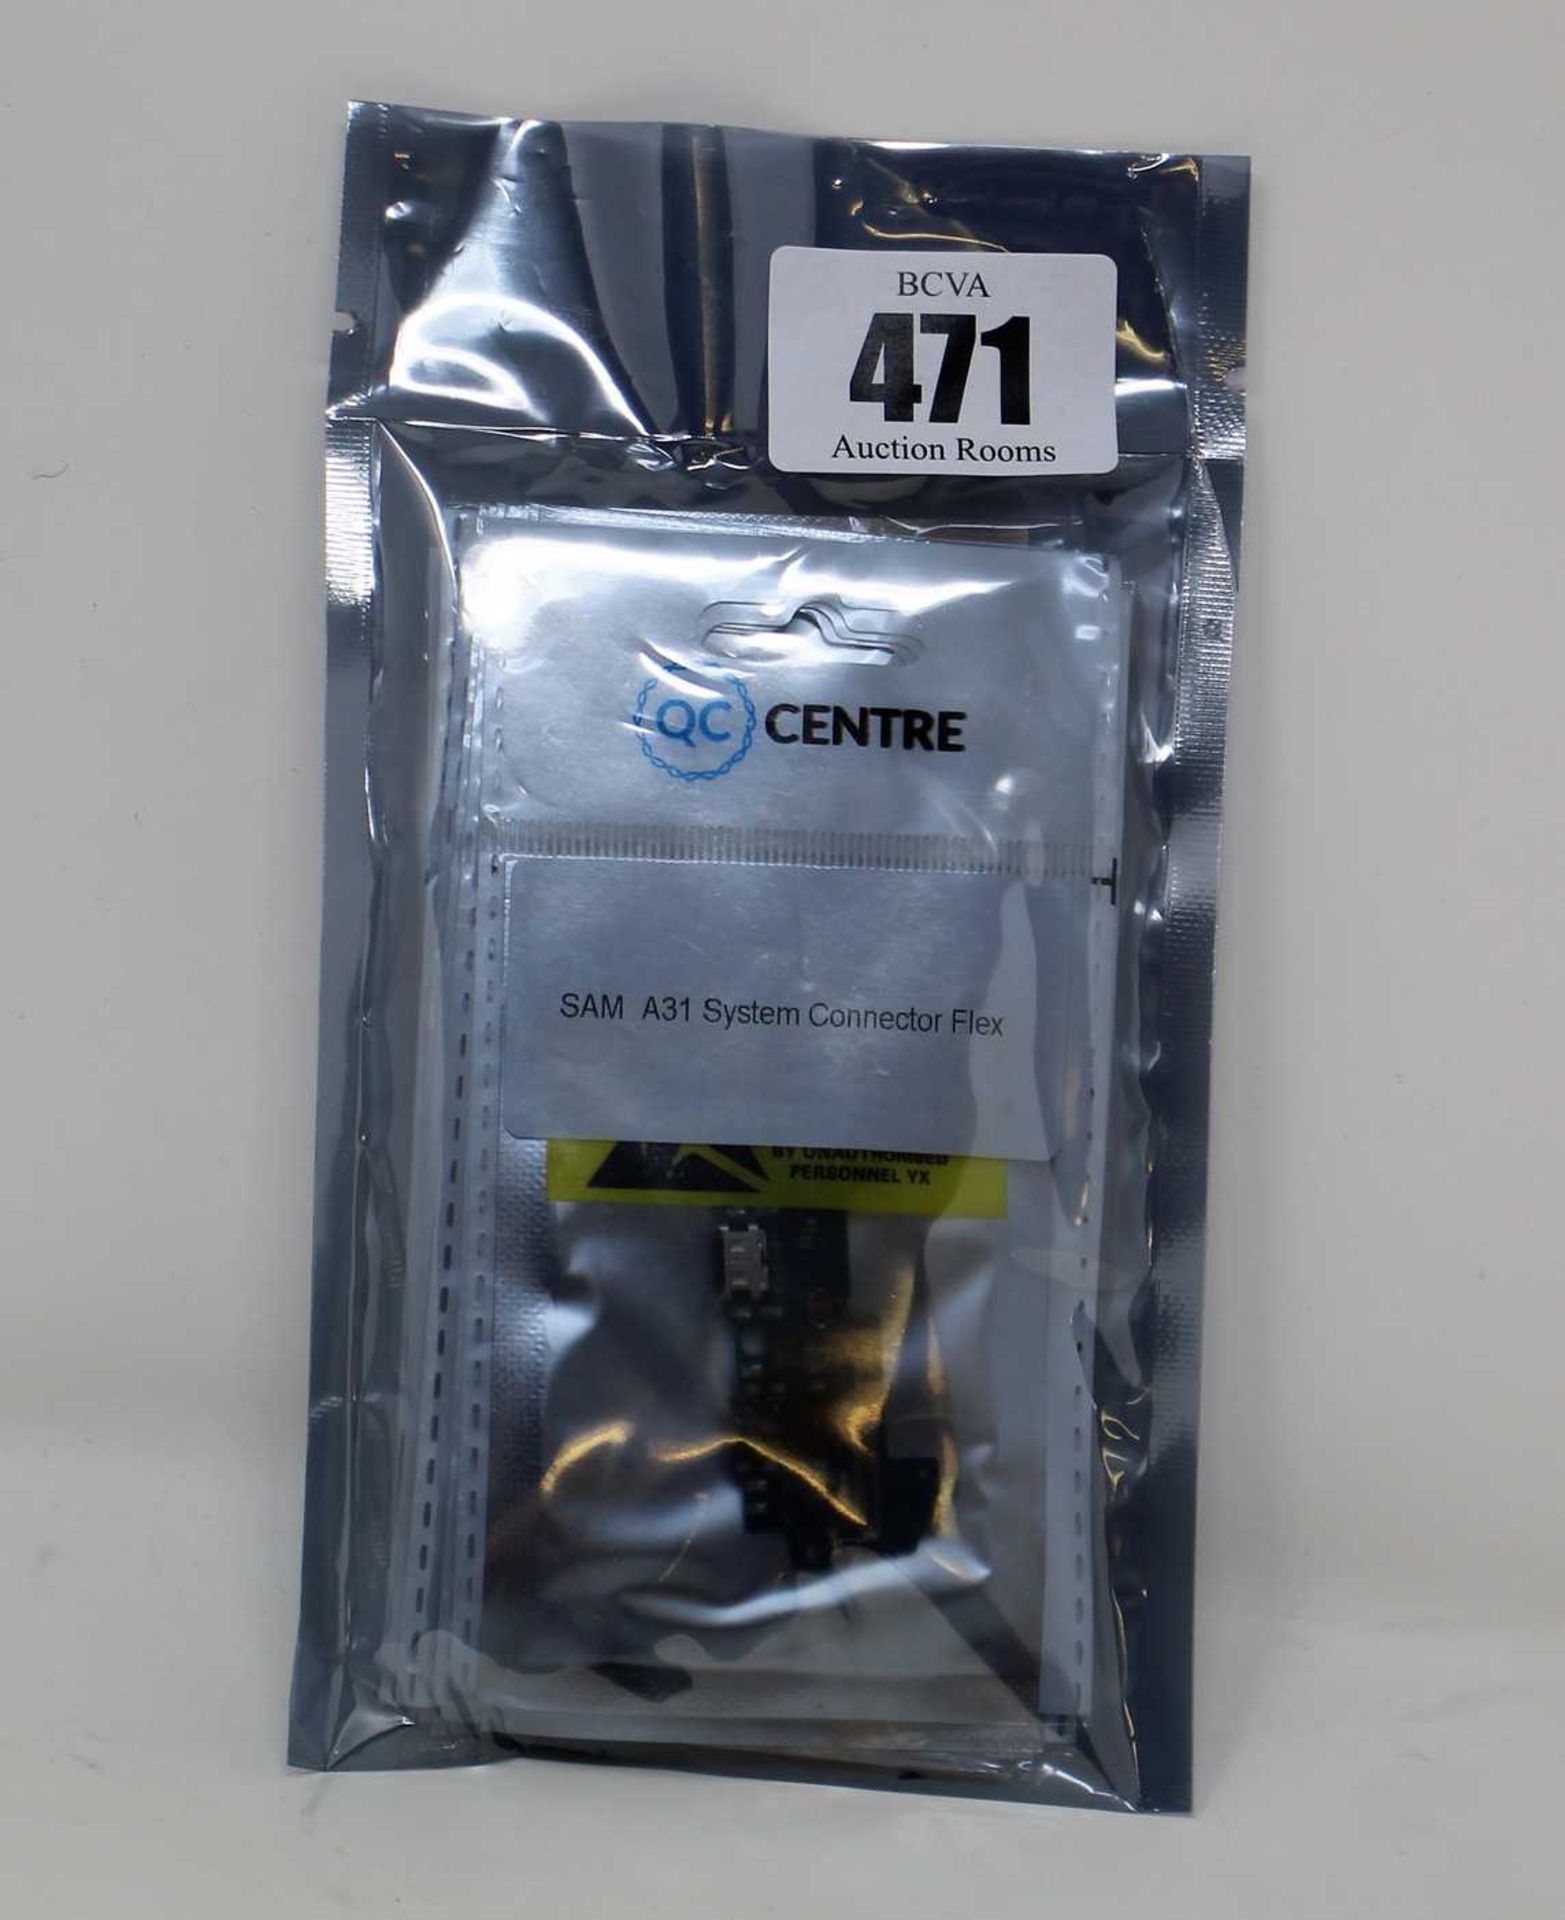 Ten as new QC Centre replacement system connector flex boards for Samsung A31 (Packaging sealed).